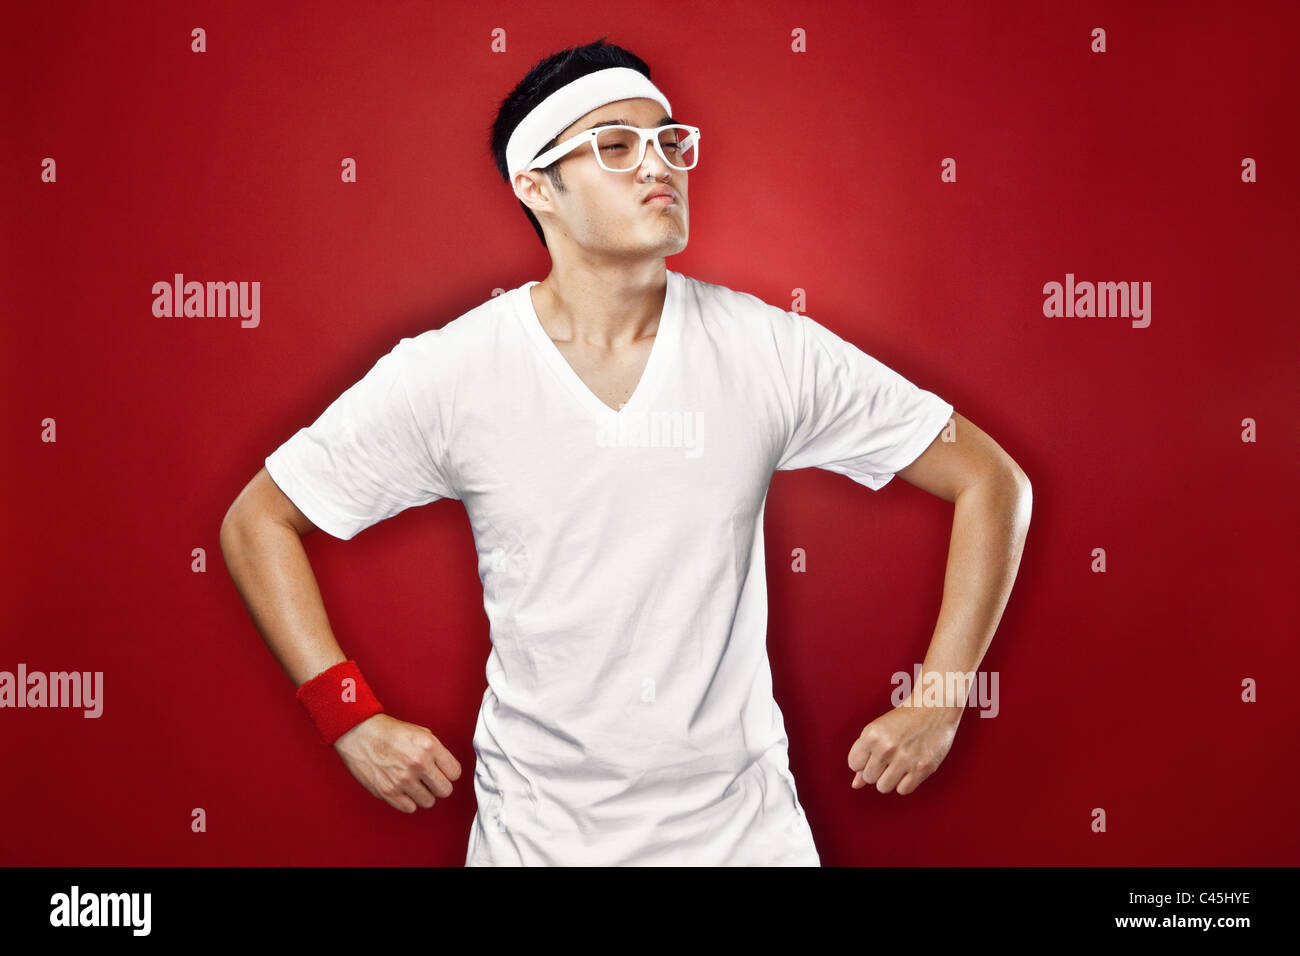 Studio portrait of Asian male teenager doing a superhero pose in white athletic gear & nerdy glasses against a red backdrop. Stock Photo